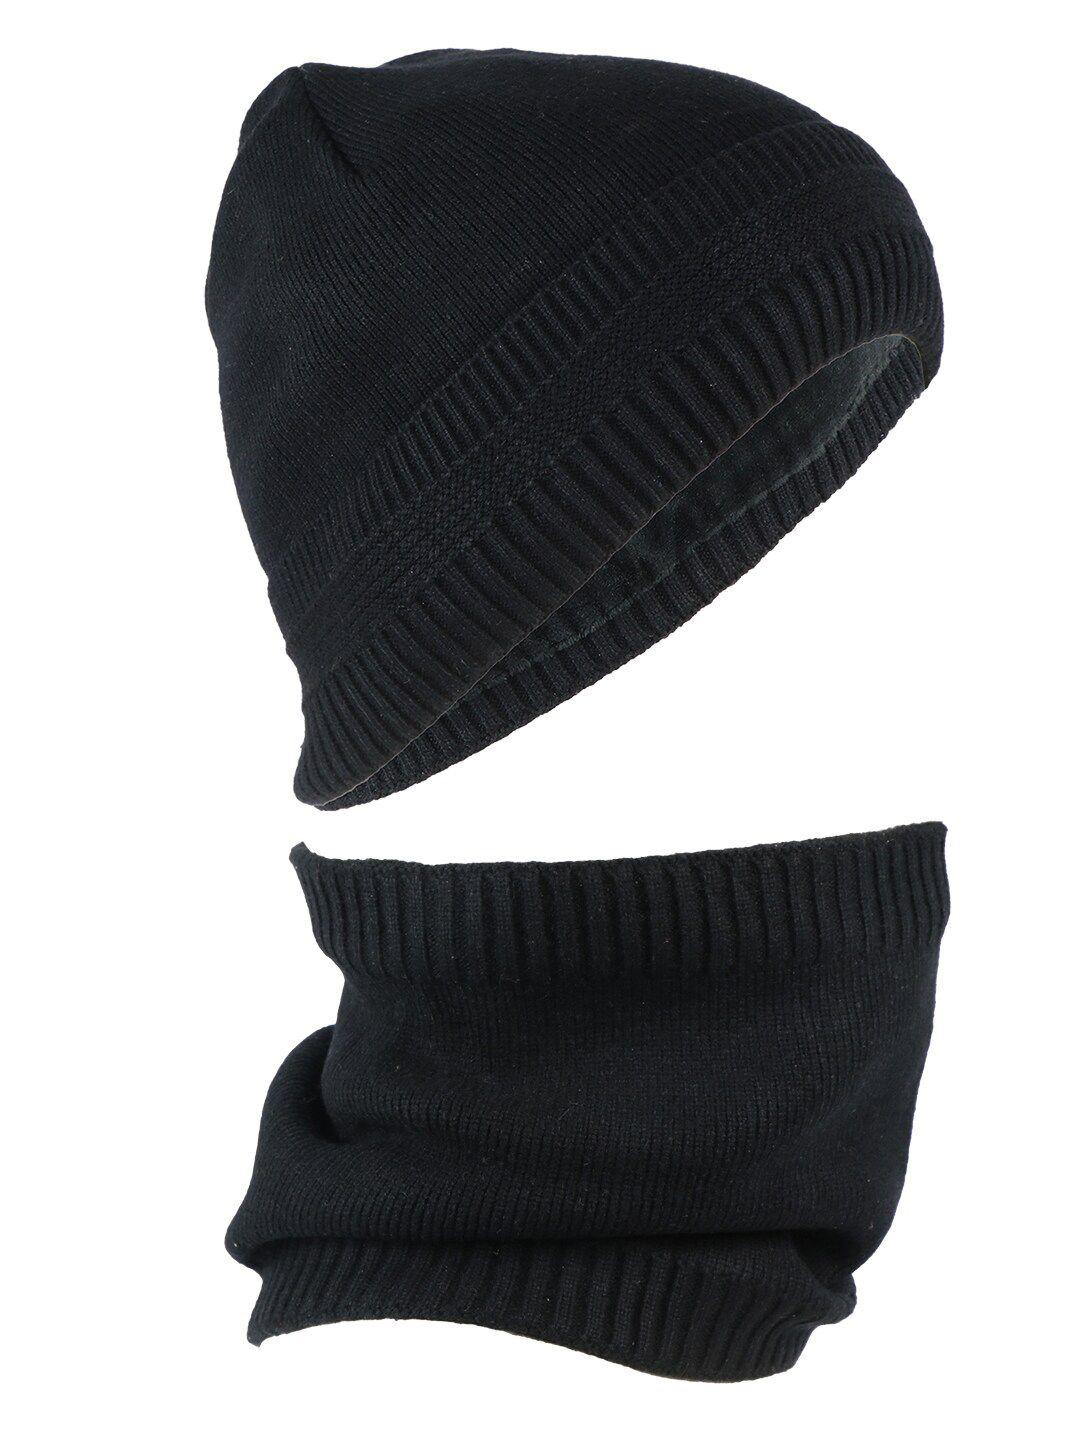 isweven black woolen beanie with neck warmer scarf